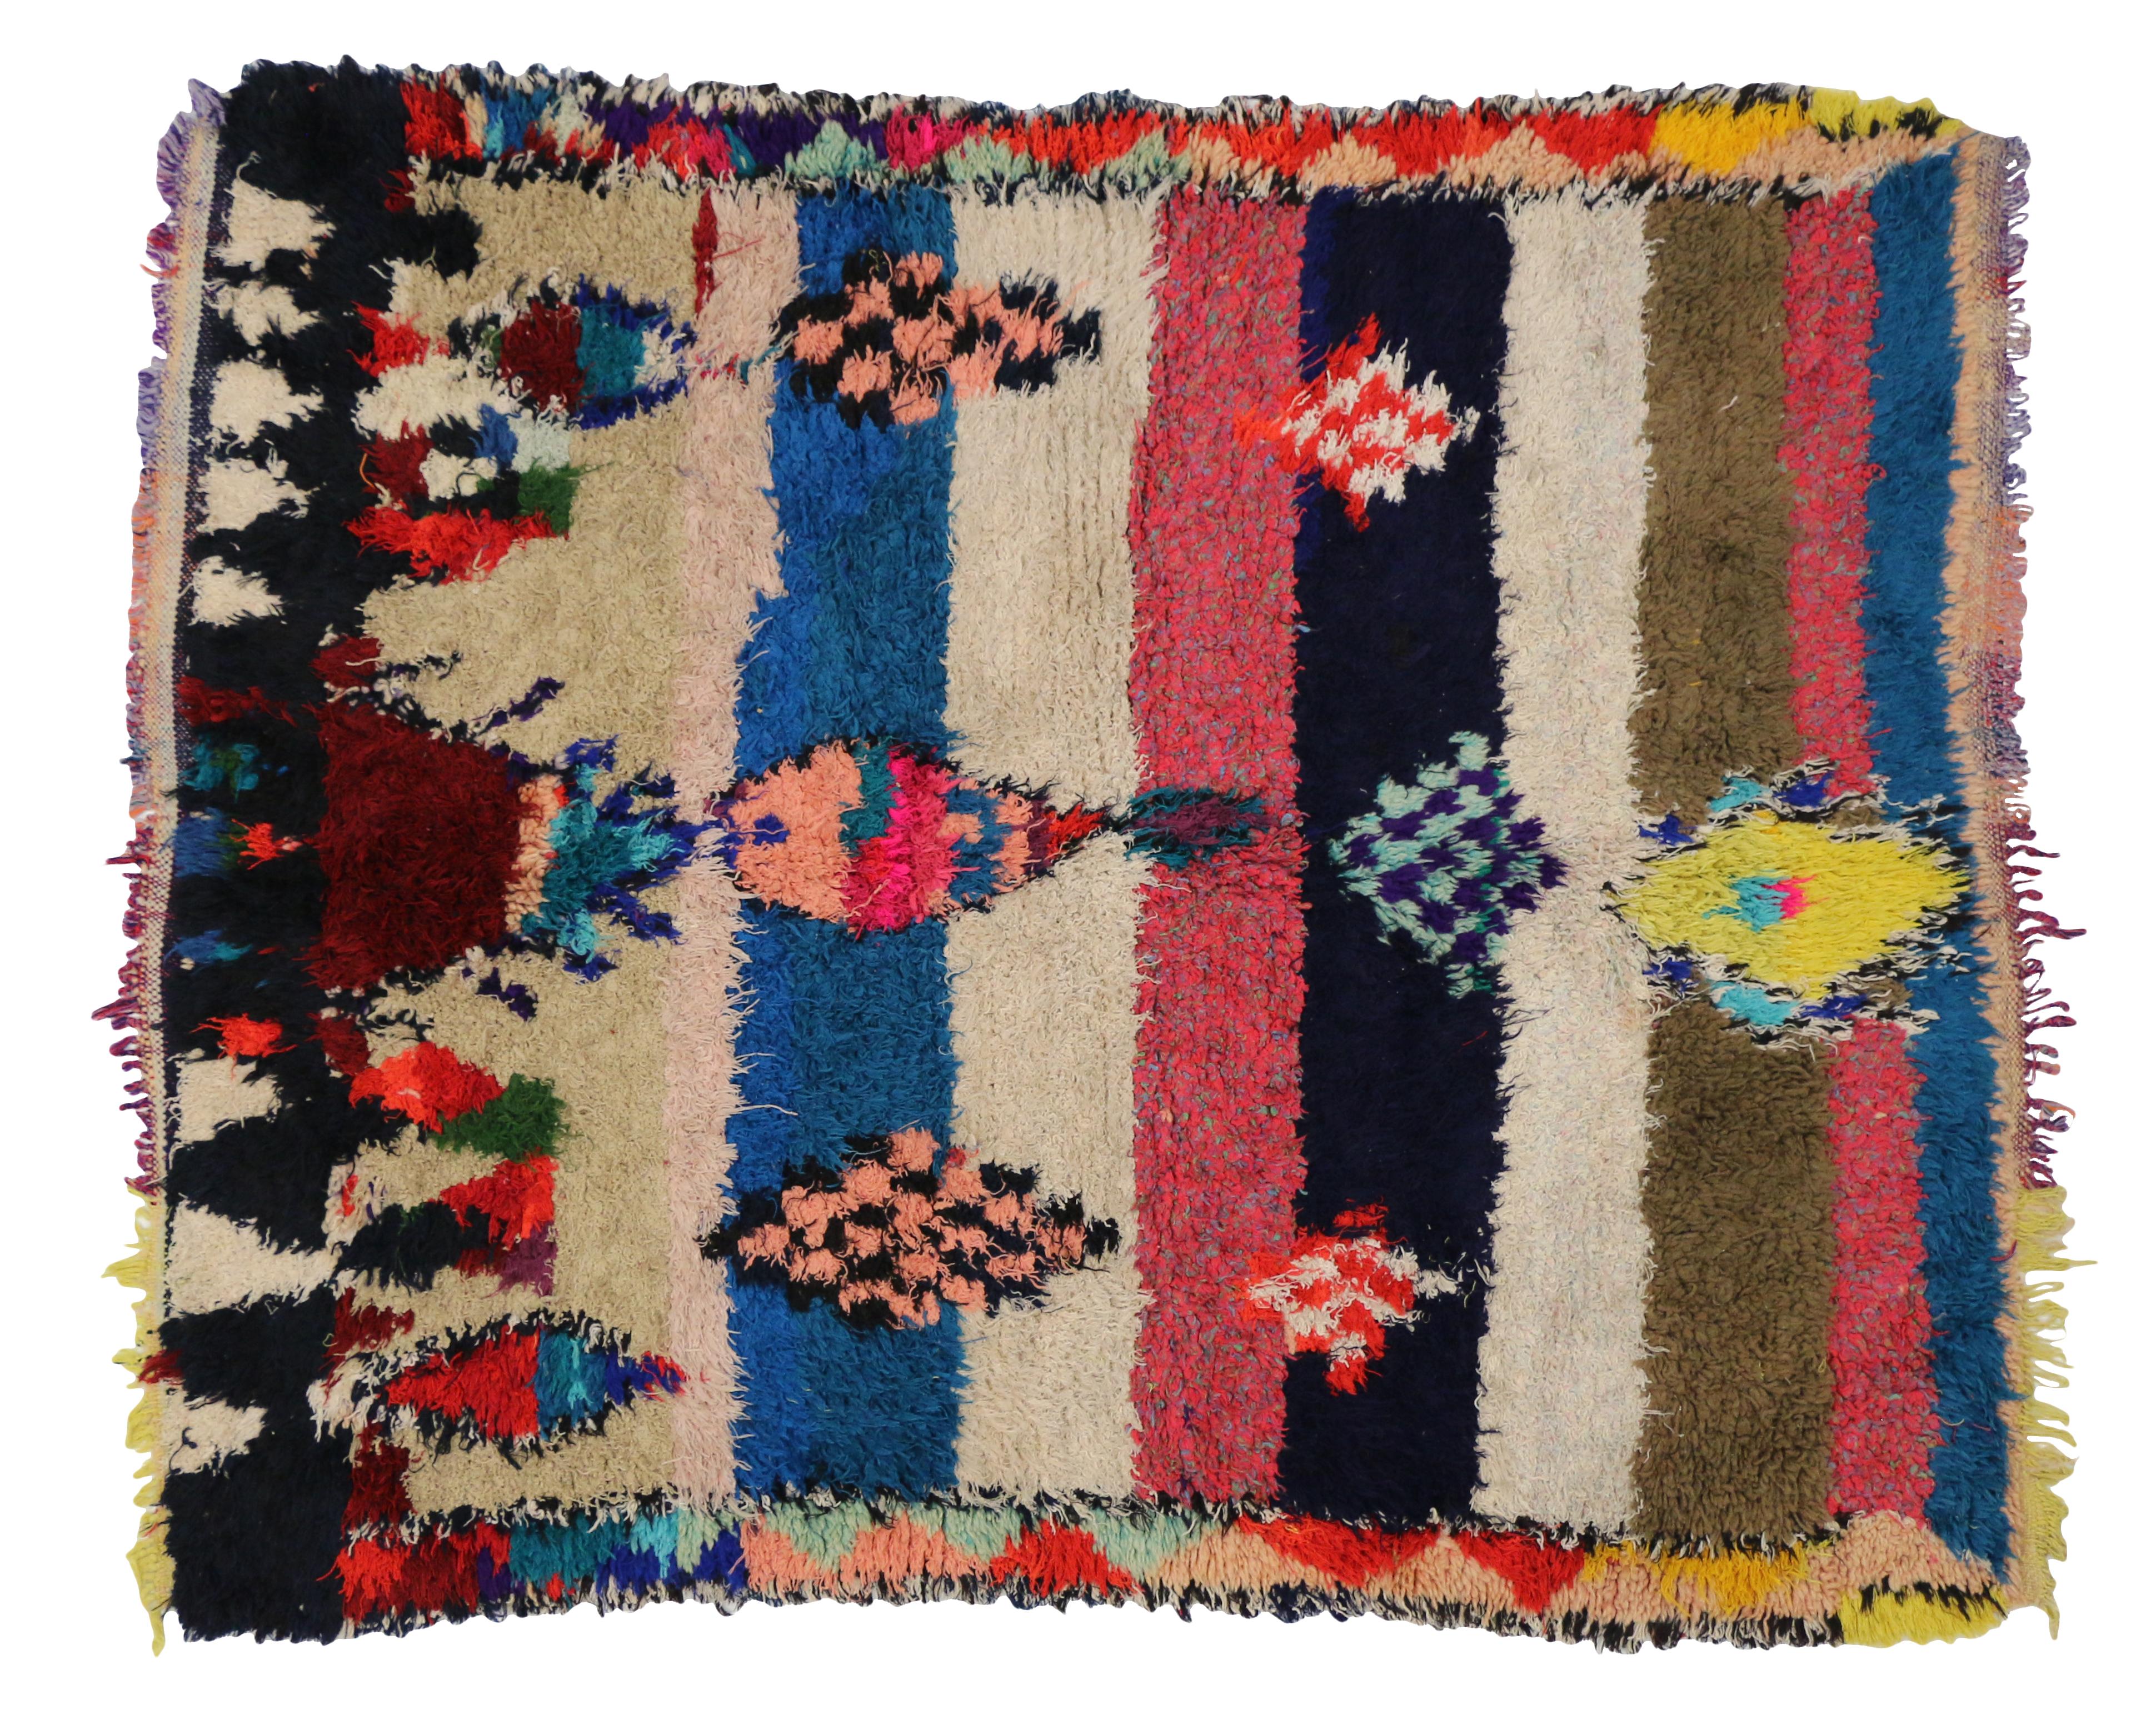 Hand-Knotted Vintage Berber Moroccan Boucherouite Rug, Colorful Moroccan Shag Accent Rug